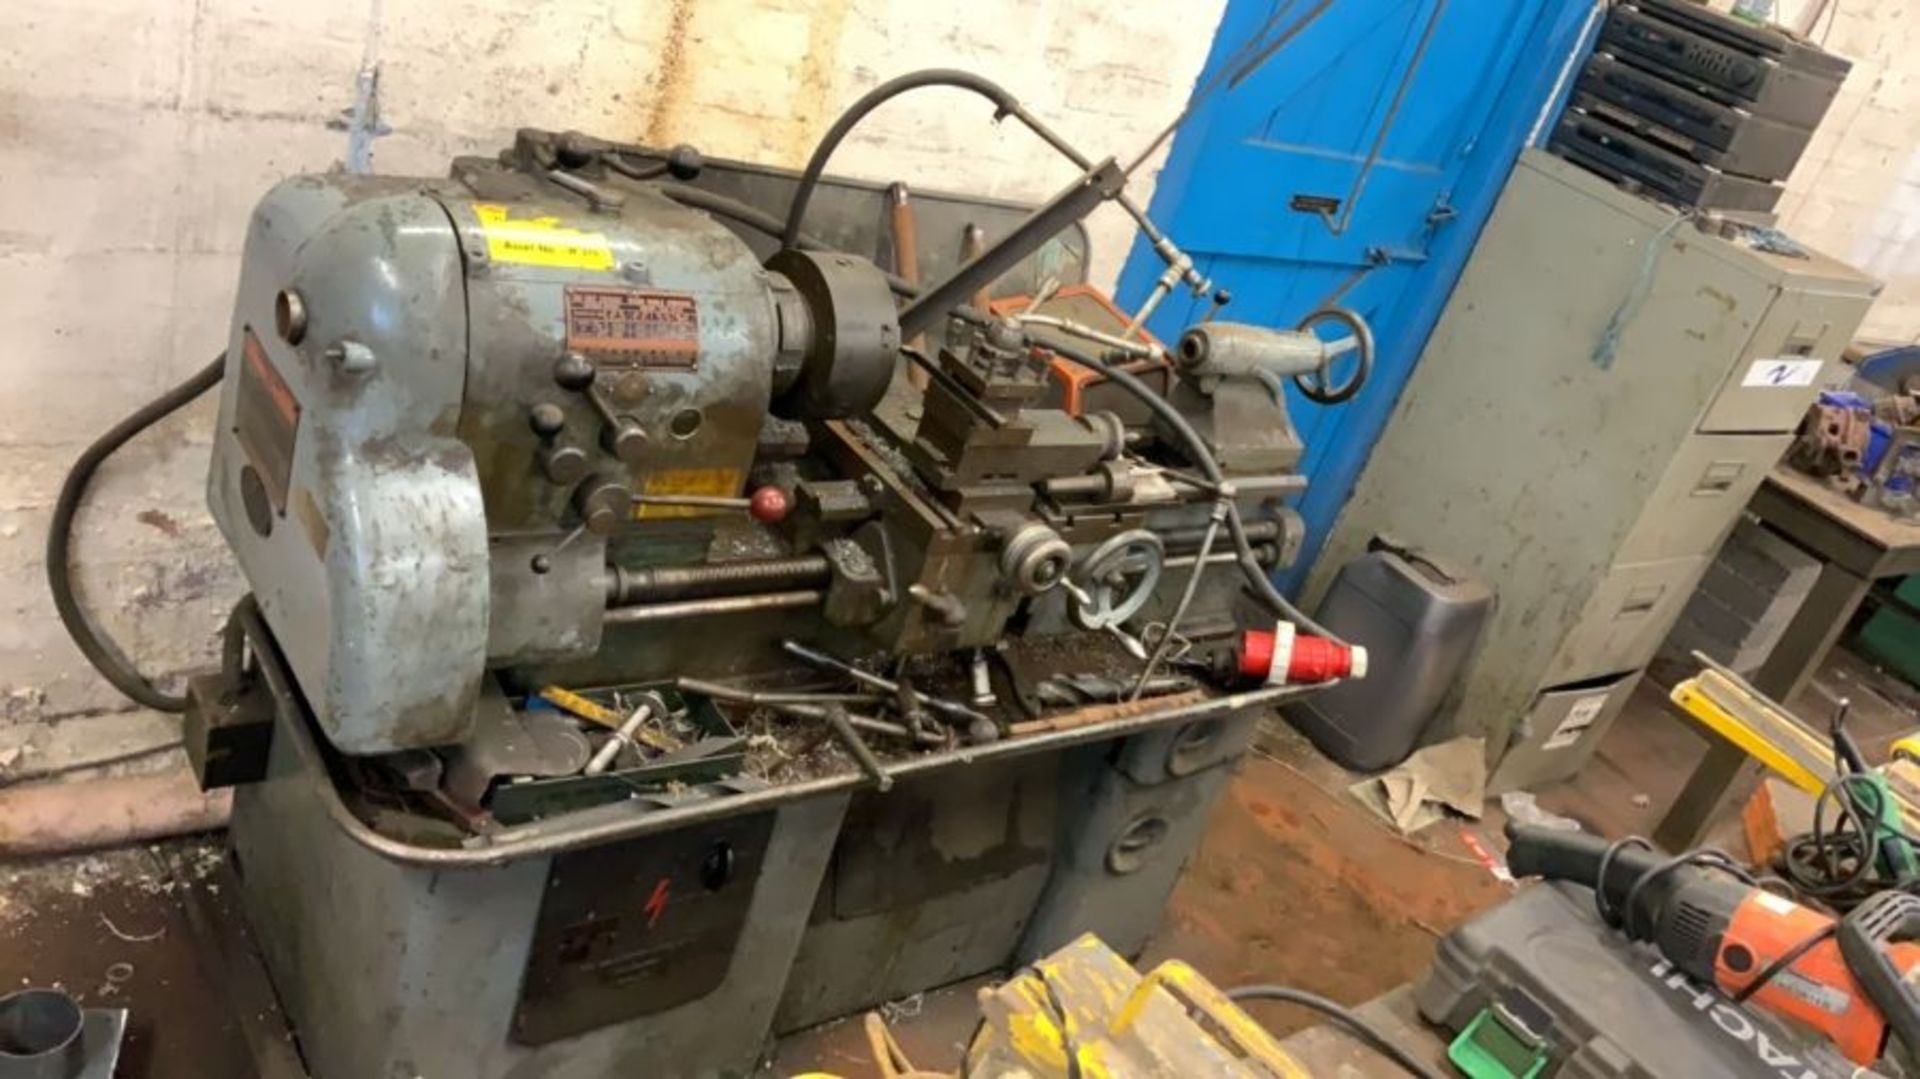 Alfred Herbert 6" Student Lathe 3 phase electrics with 415V Disconnection Plug, with Guards, Drills,